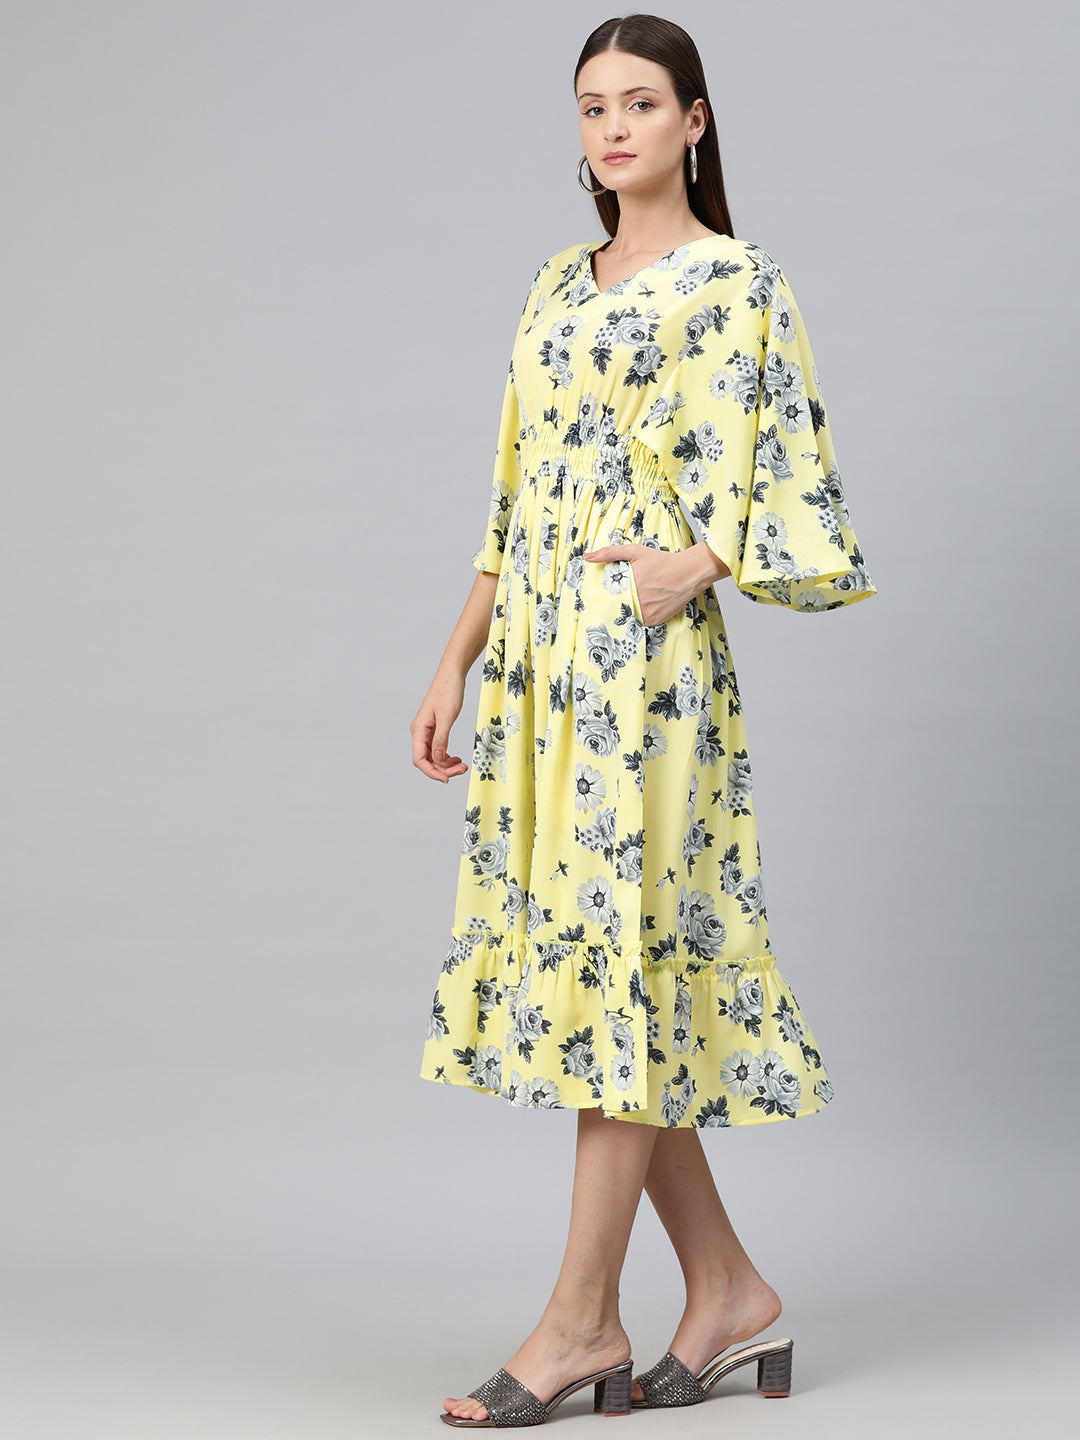 Cottinfab Women Floral Print Flared Sleeves Smocked Tiered Crepe Fit & Flare Midi Dress